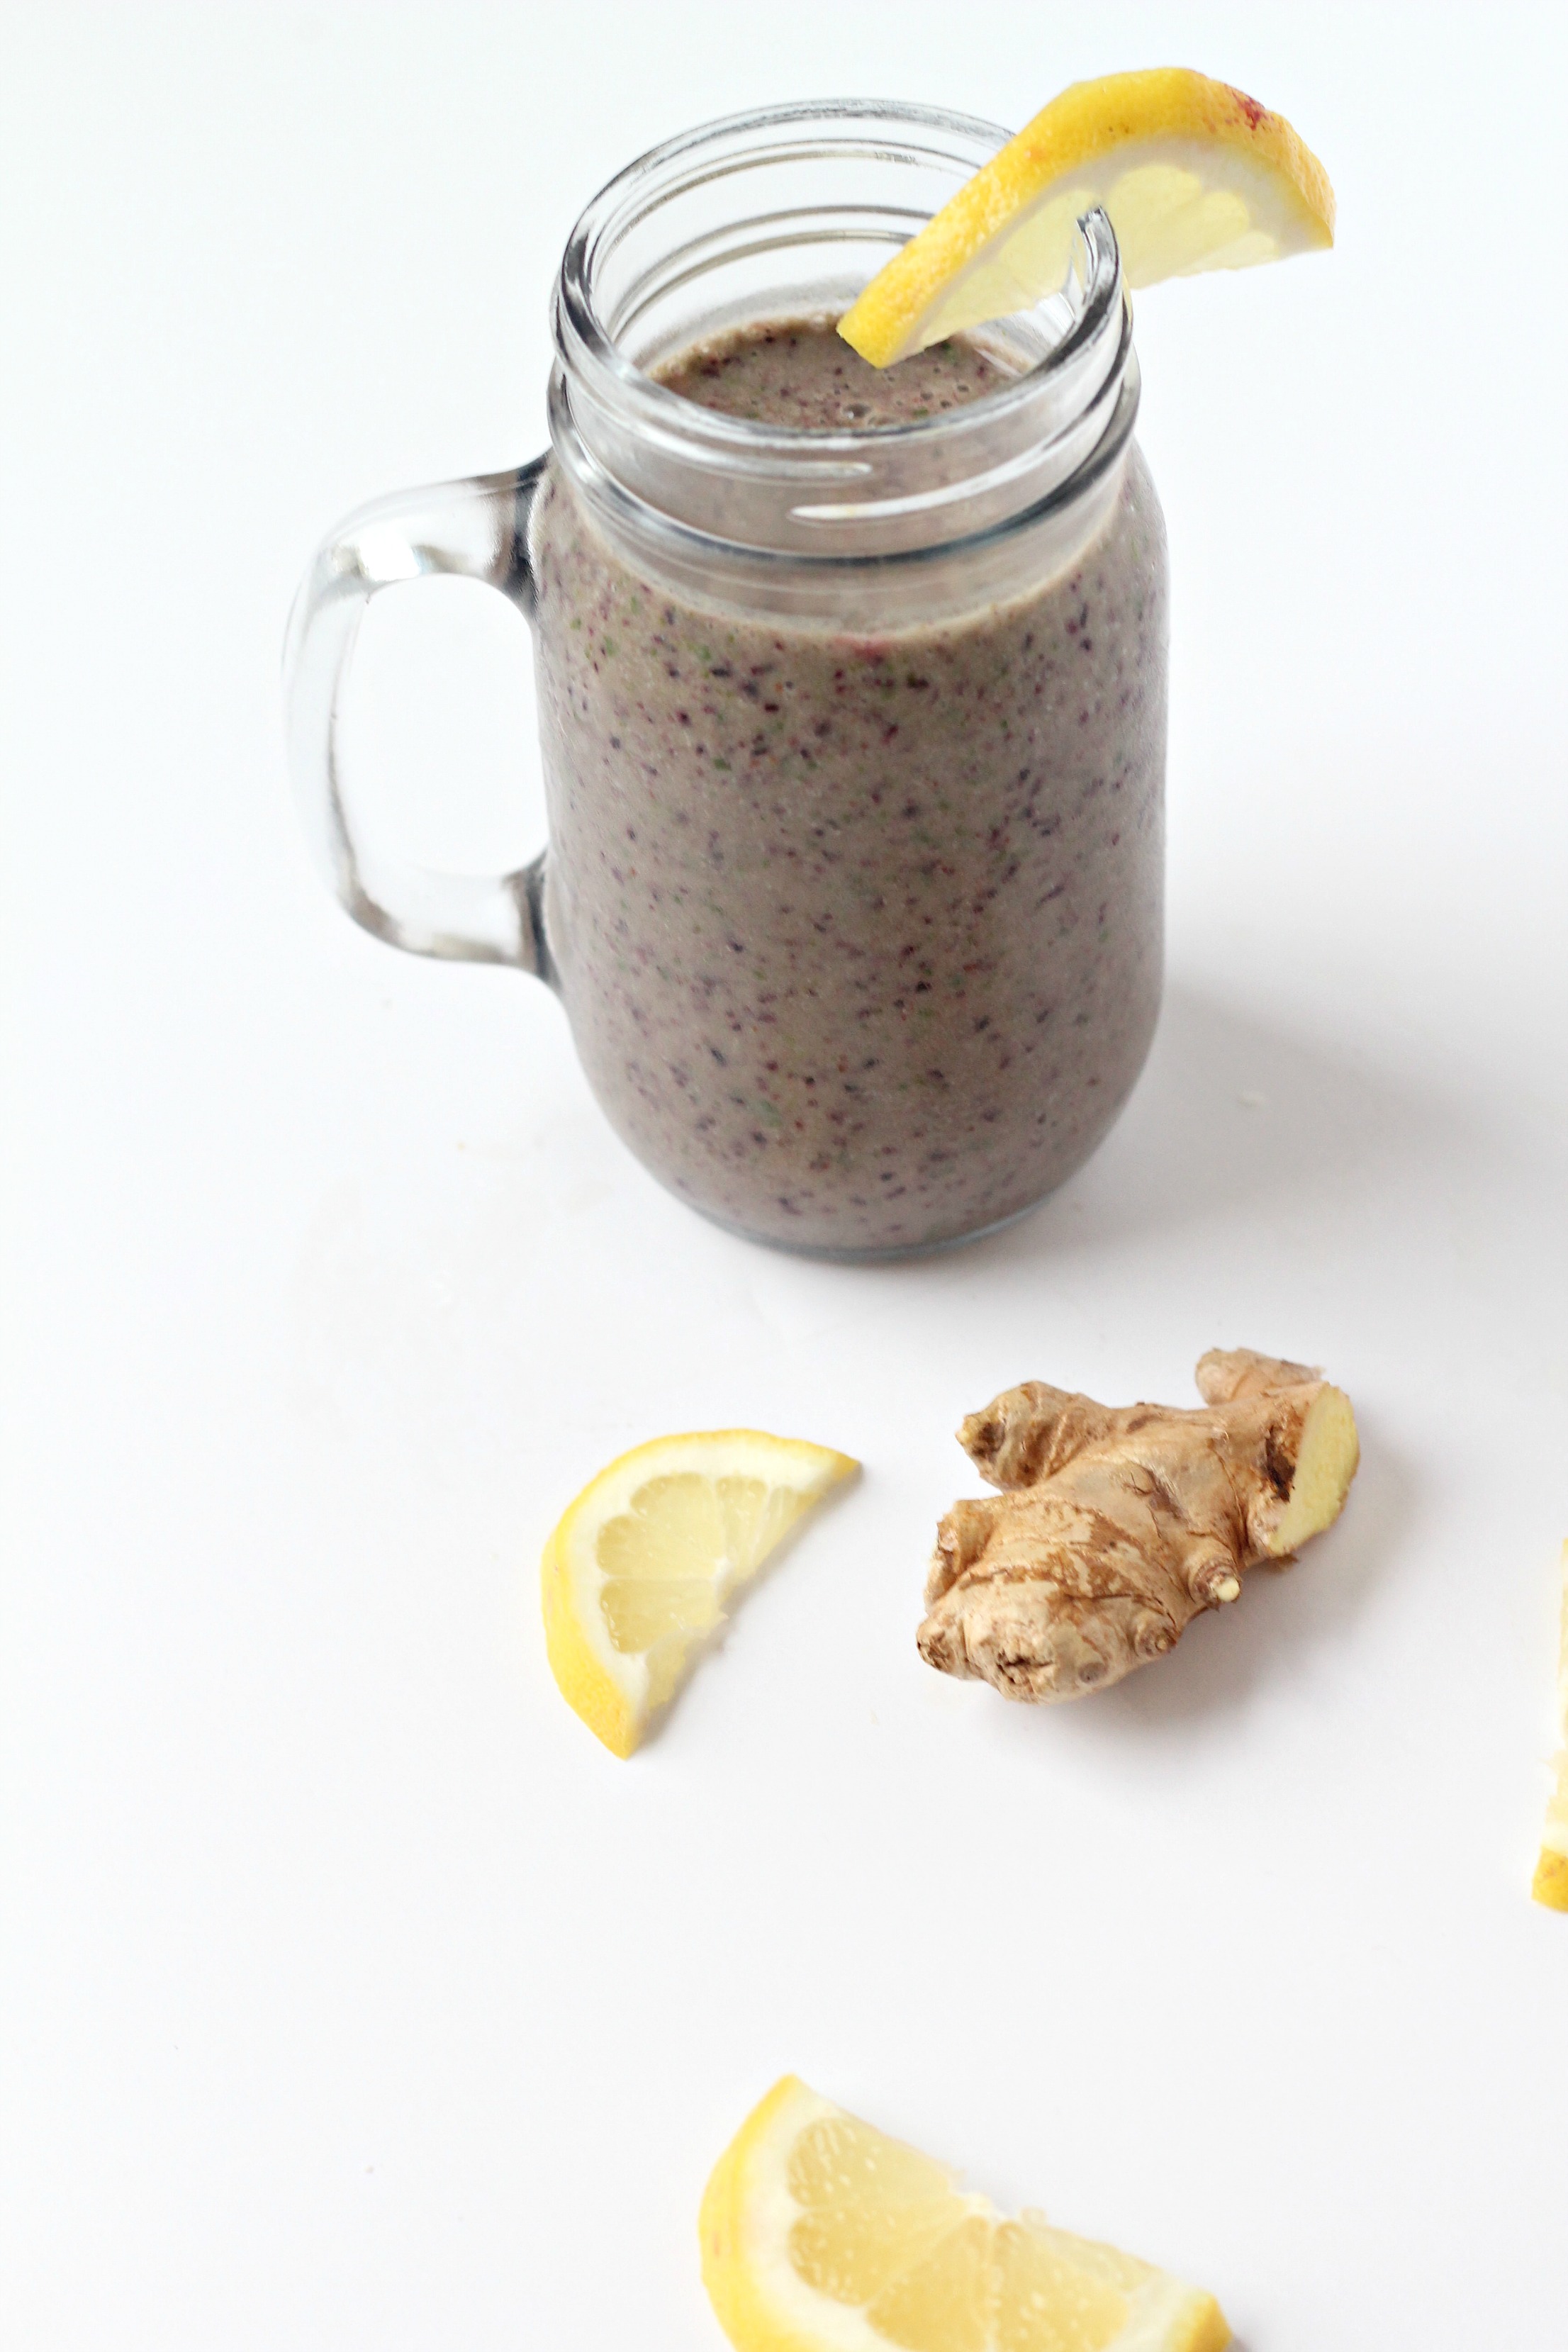 This Hangover Smoothie will kick away that headache and send you on your way for a great, productive day!